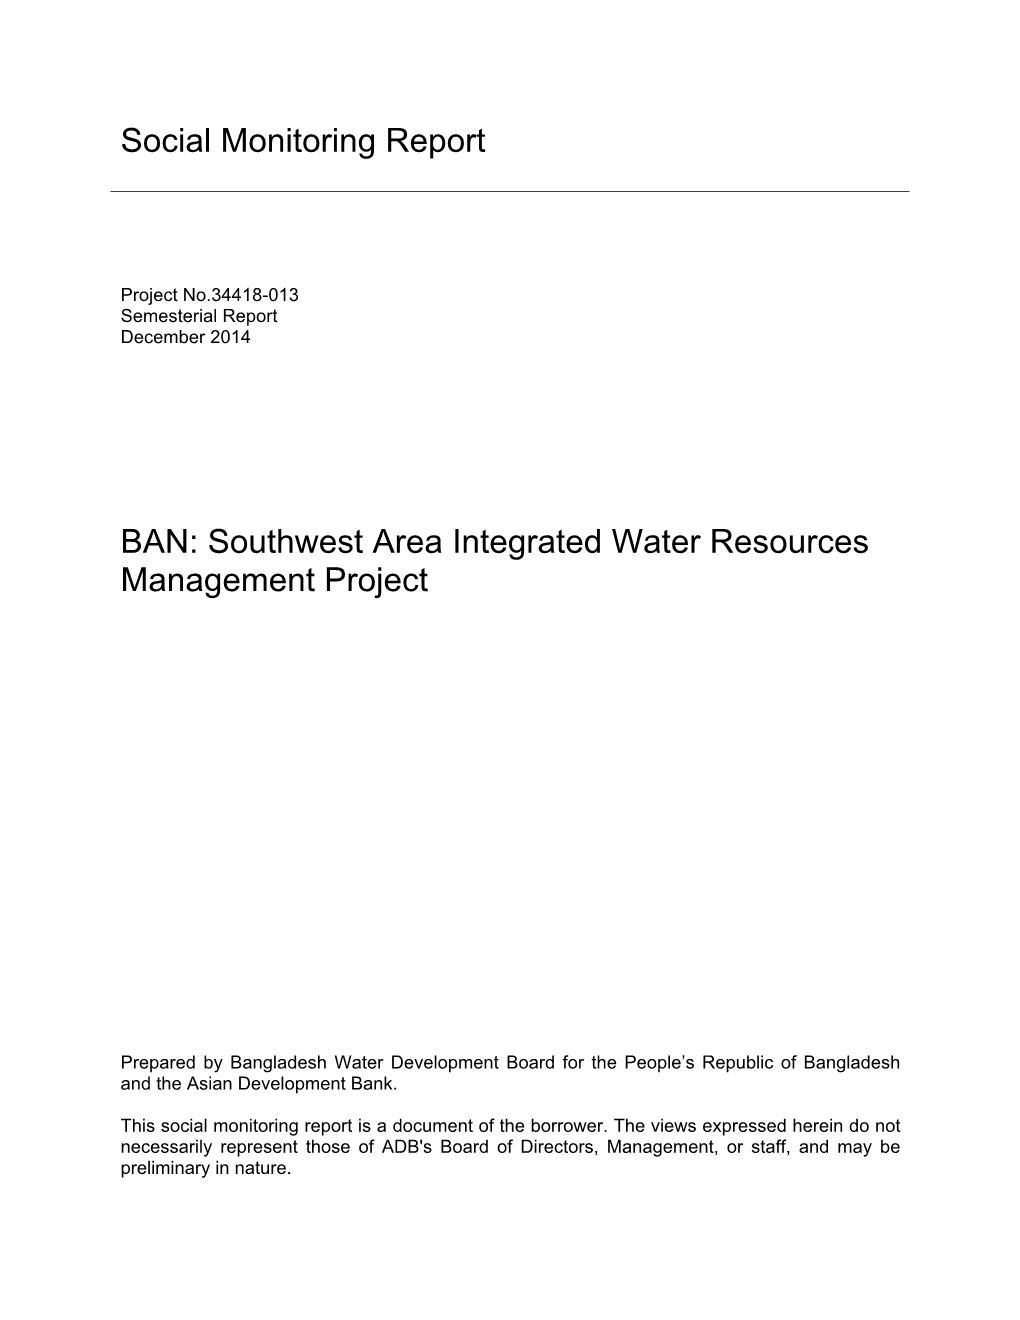 Southwest Area Integrated Water Resources Management Project